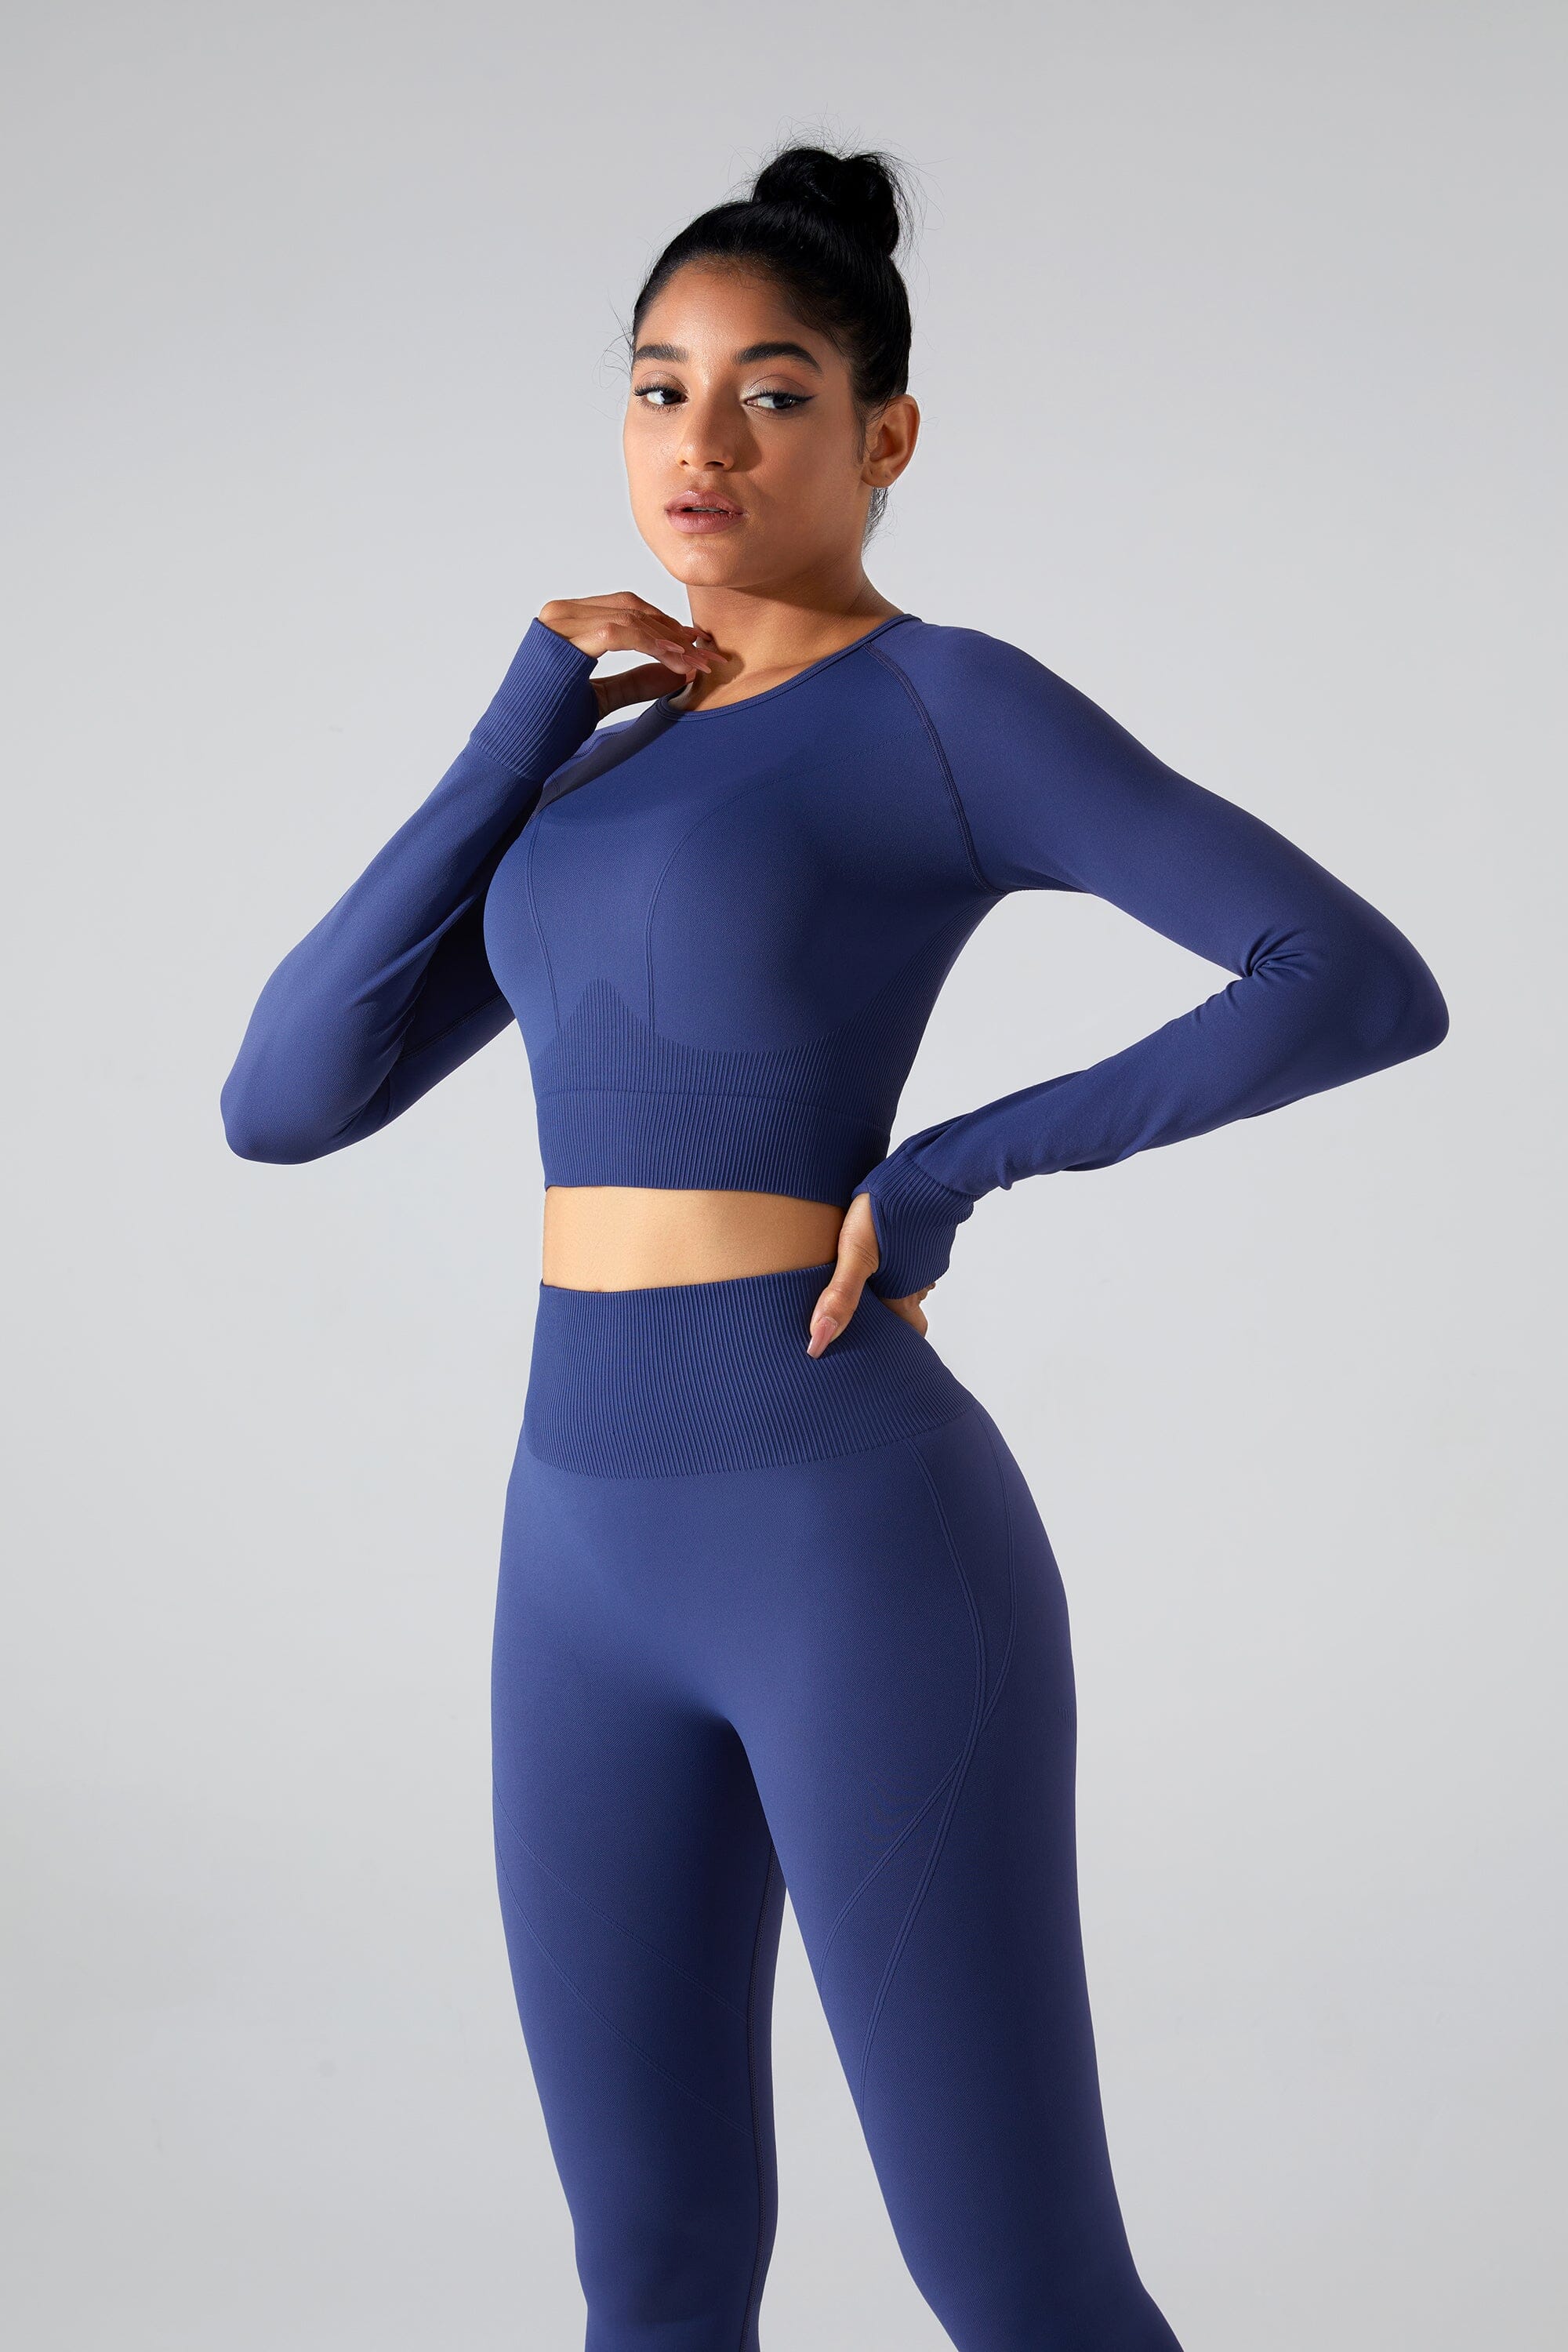 Eclipse Seamless Top Top Starlethics 